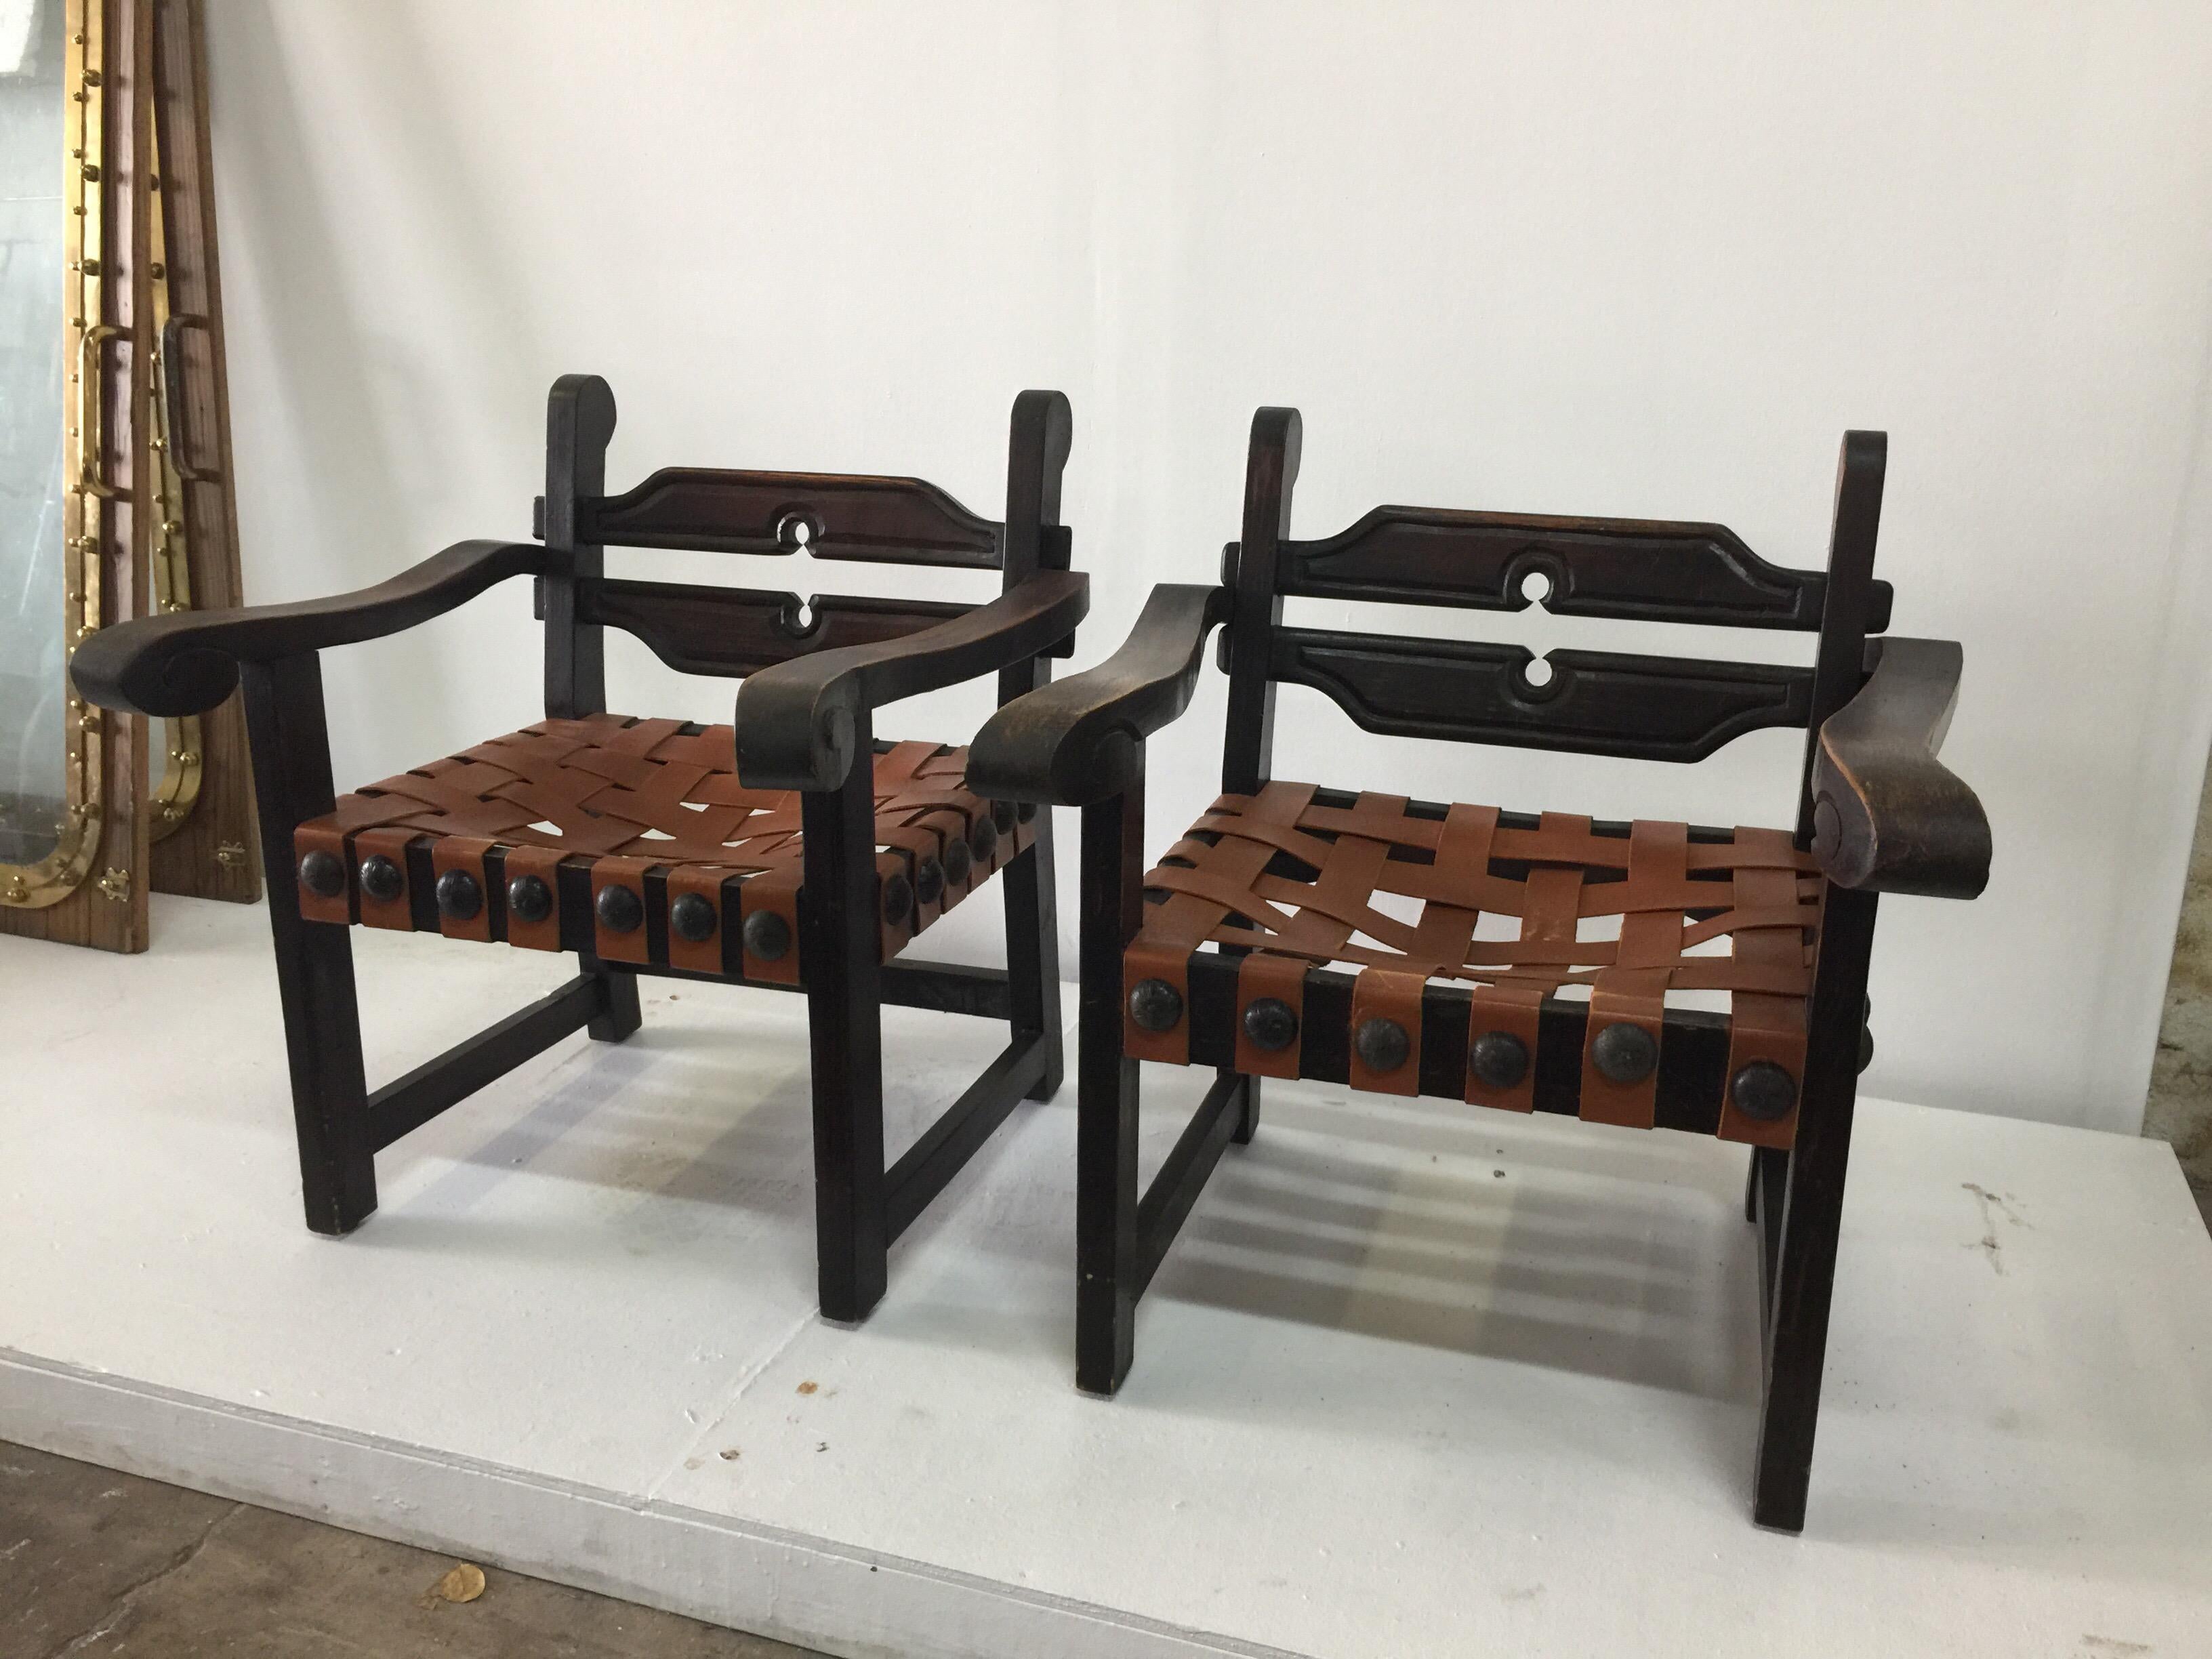 William Spratling Mexican Wood Carved Armchairs with Leather Strap Seats, Pair For Sale 4